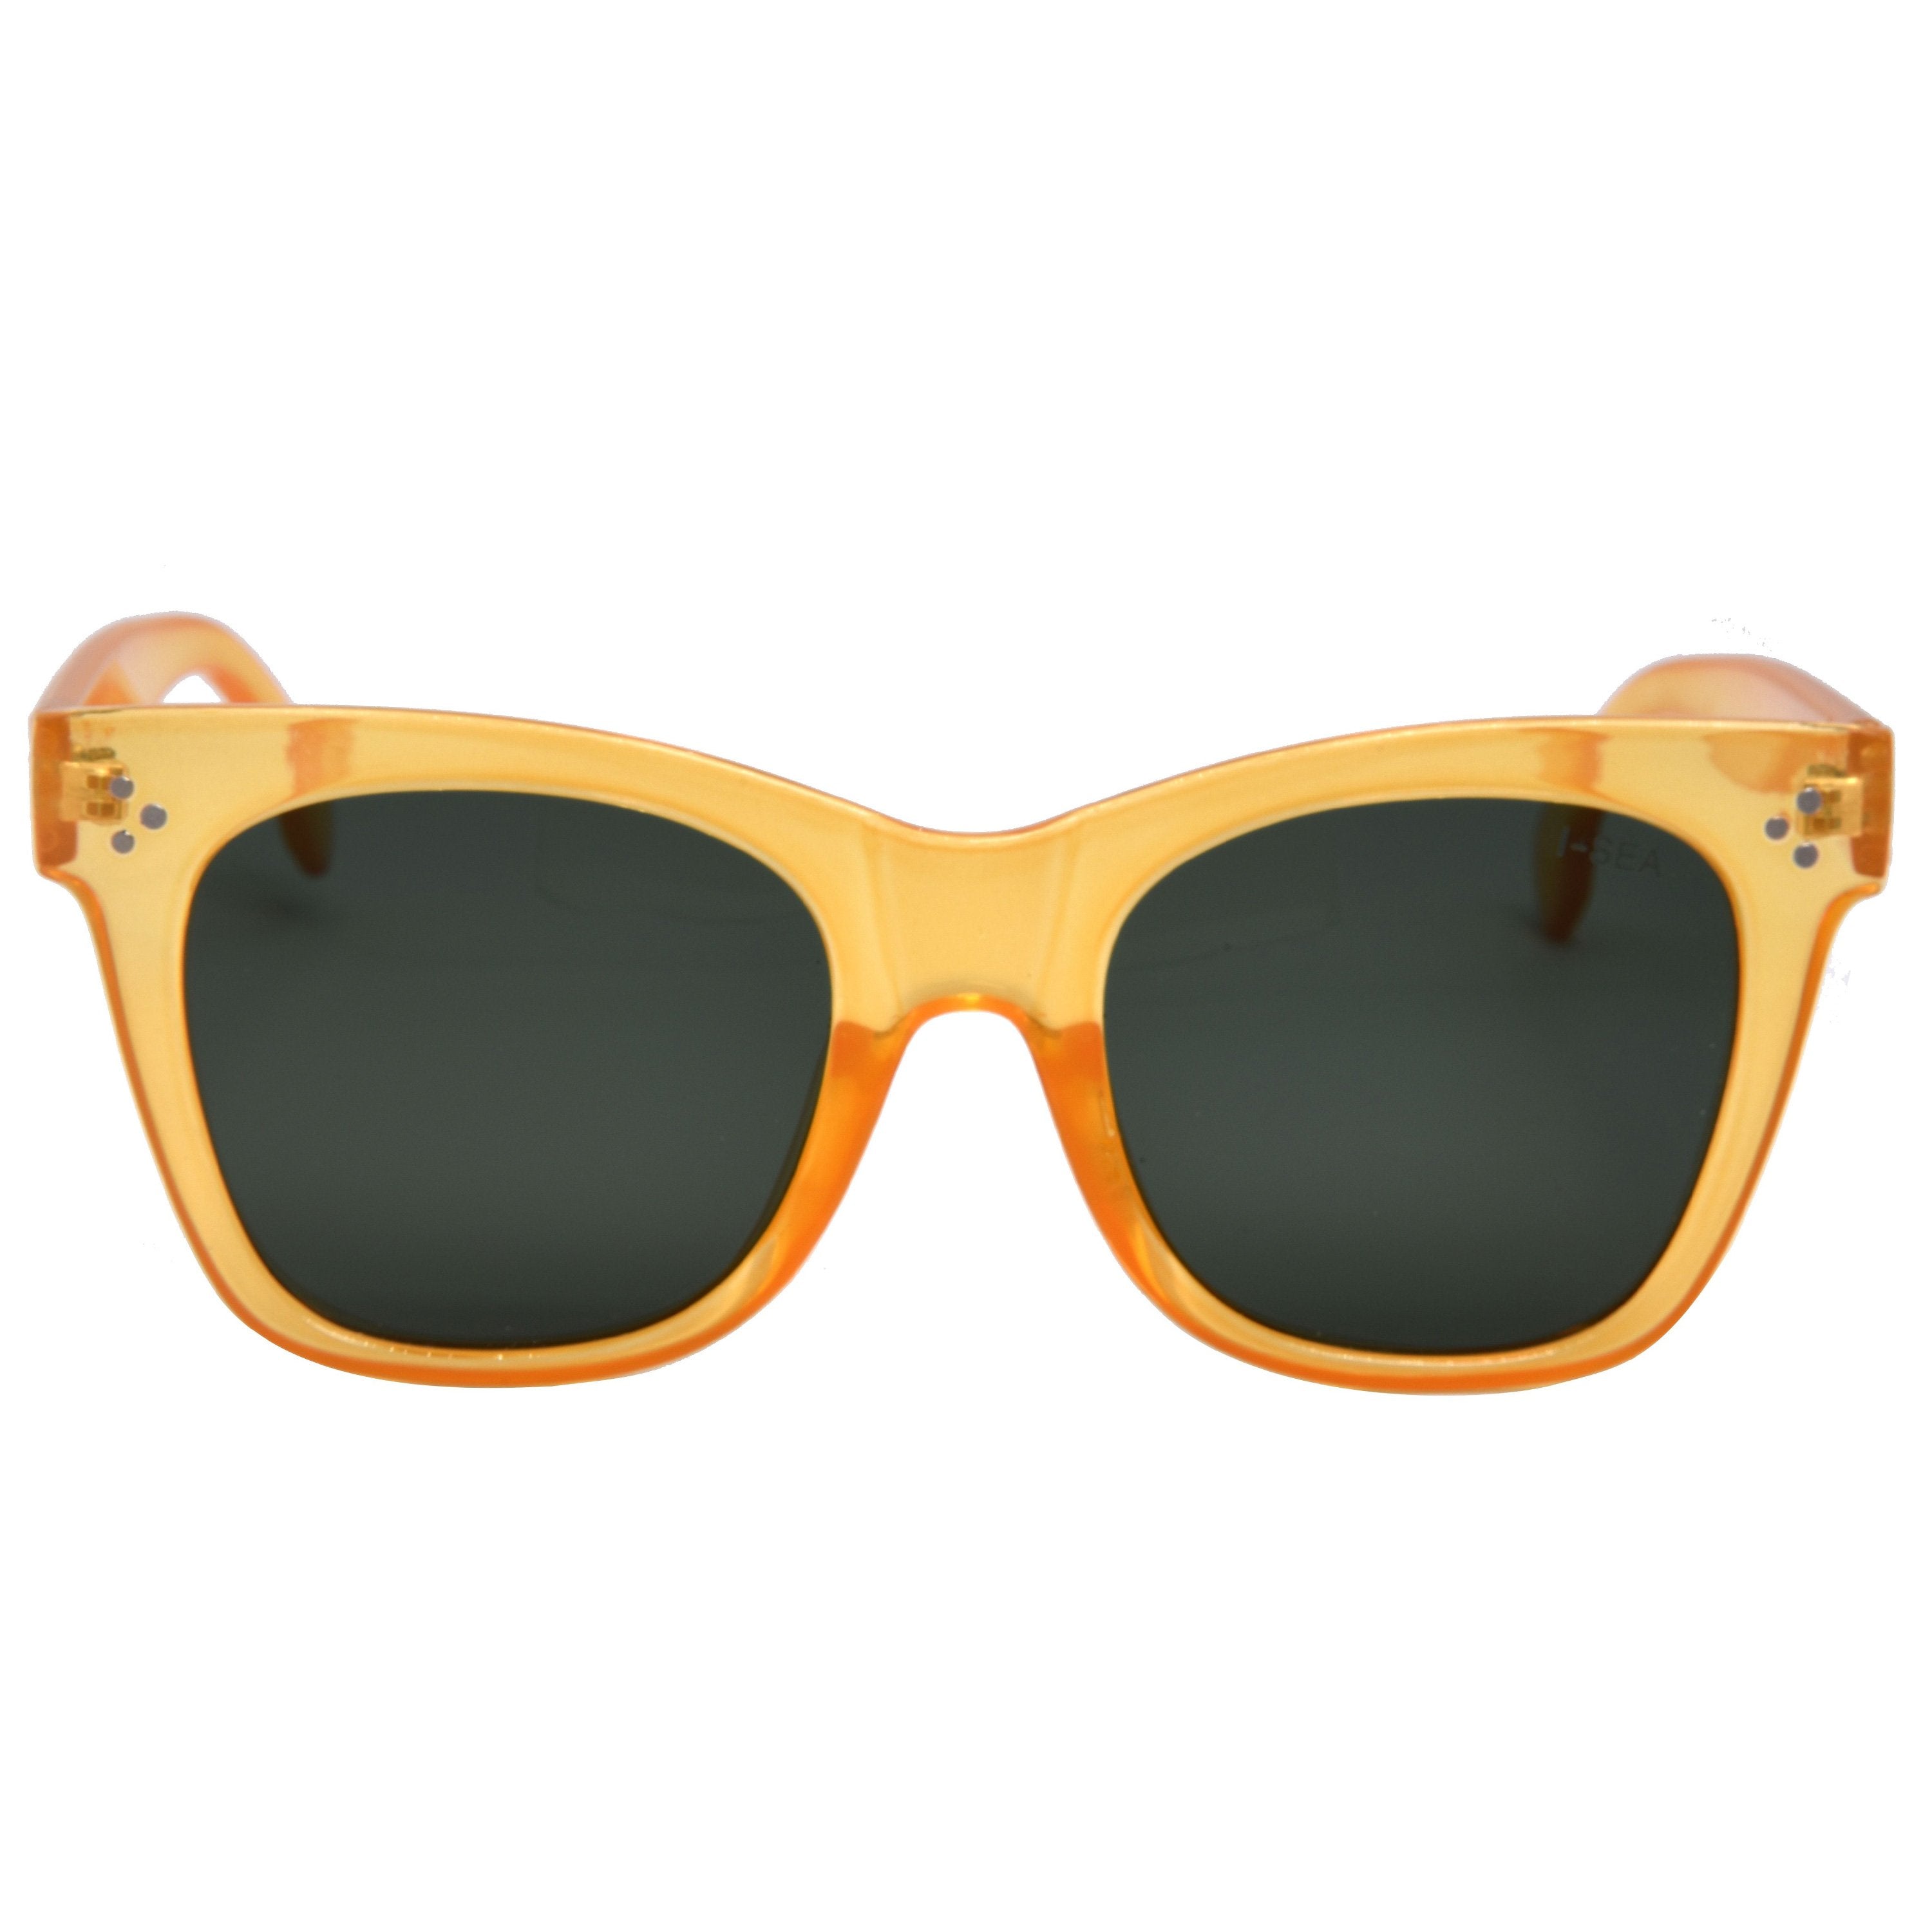 Clear yellow soft square glasses